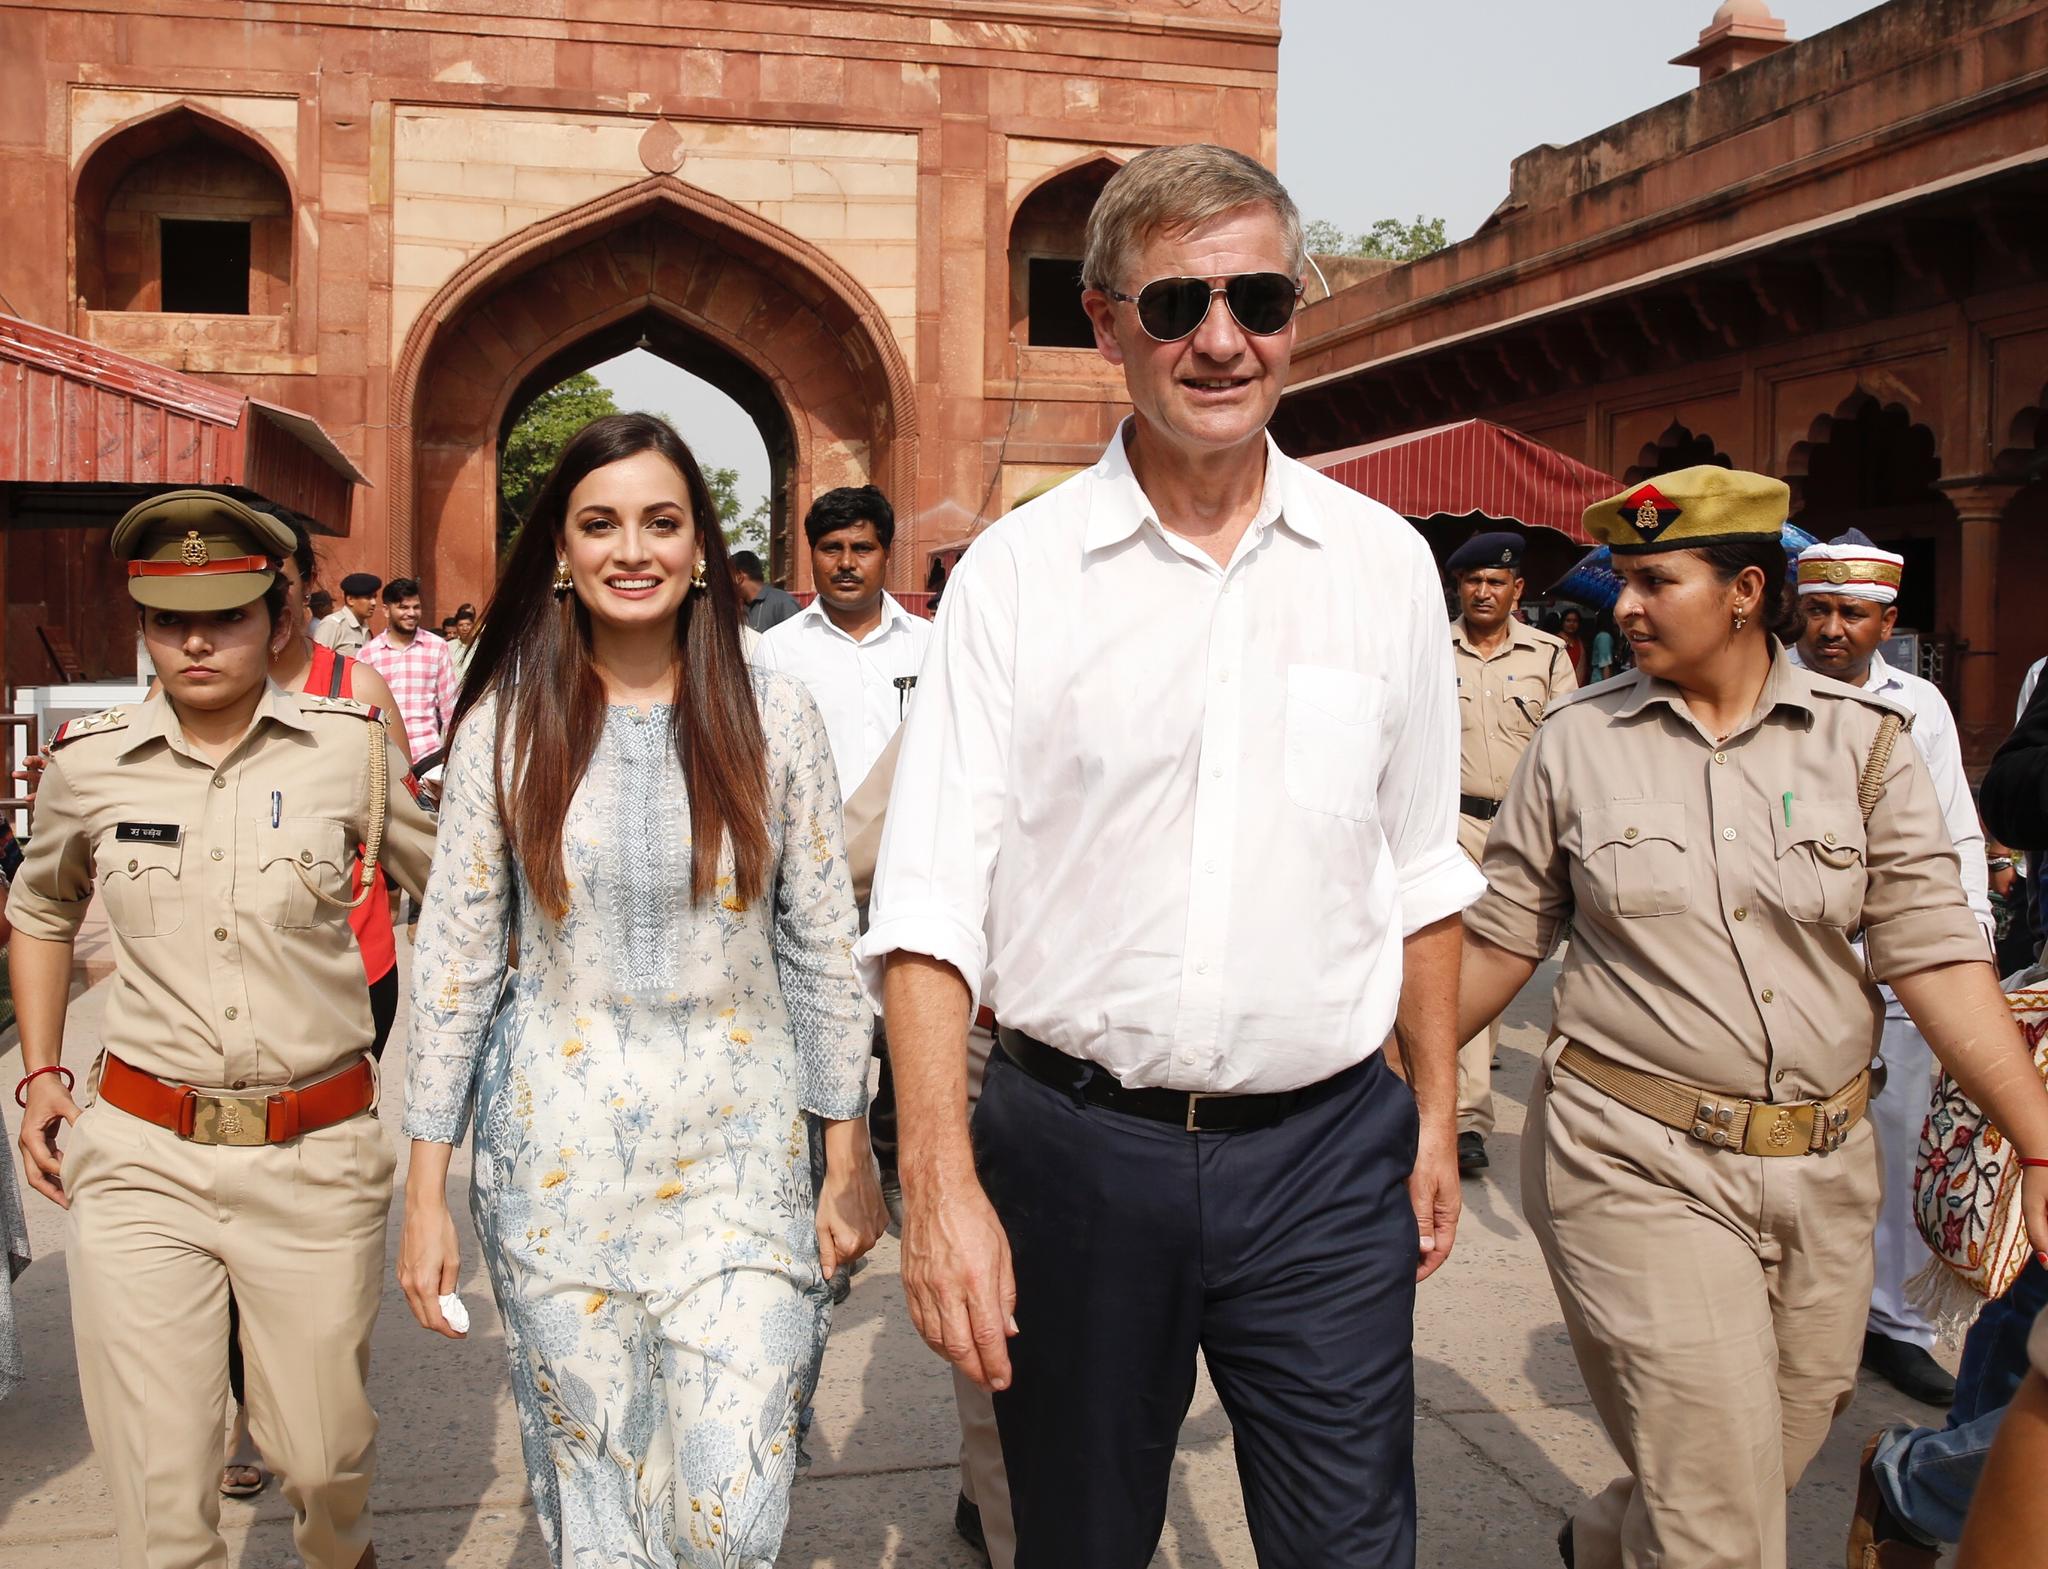 Erik Solheim is absent from the UNEP headquarters in Nairobi almost 80 per cent of the time. Here he is on a visit to India earlier this year.